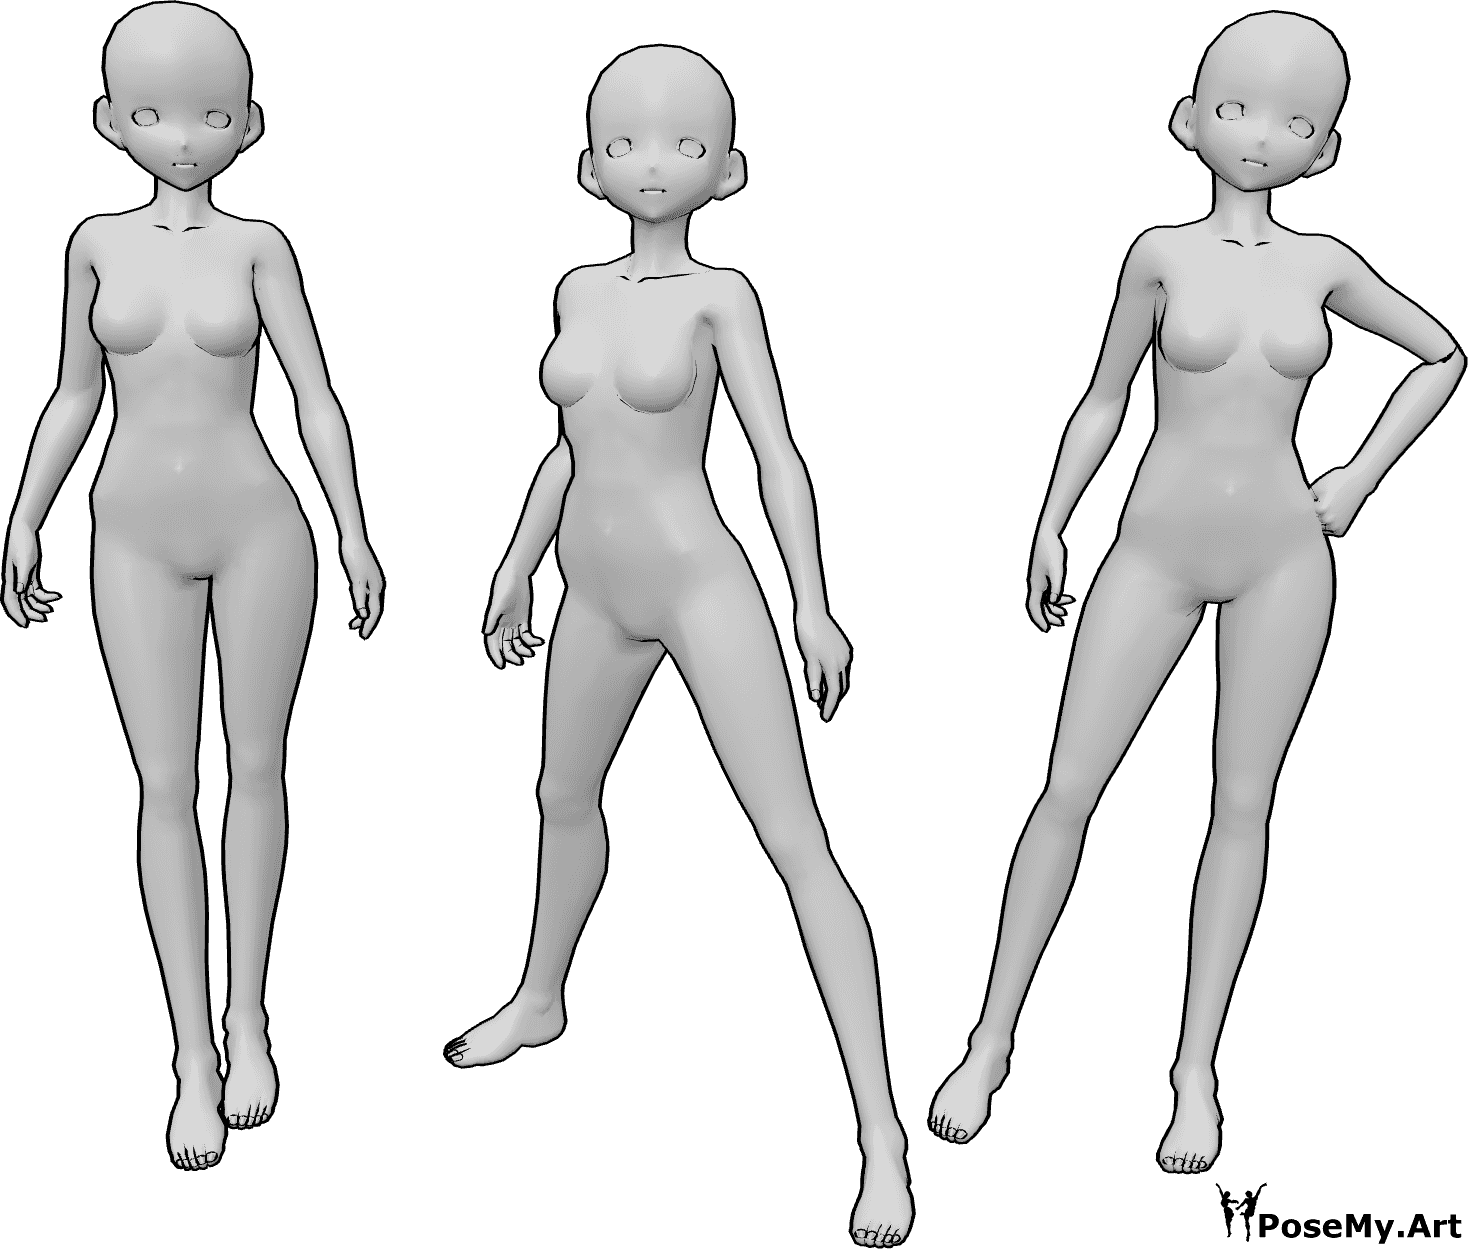 Pose Reference- Three anime females pose - Three anime females are standing and posing confidently, like models